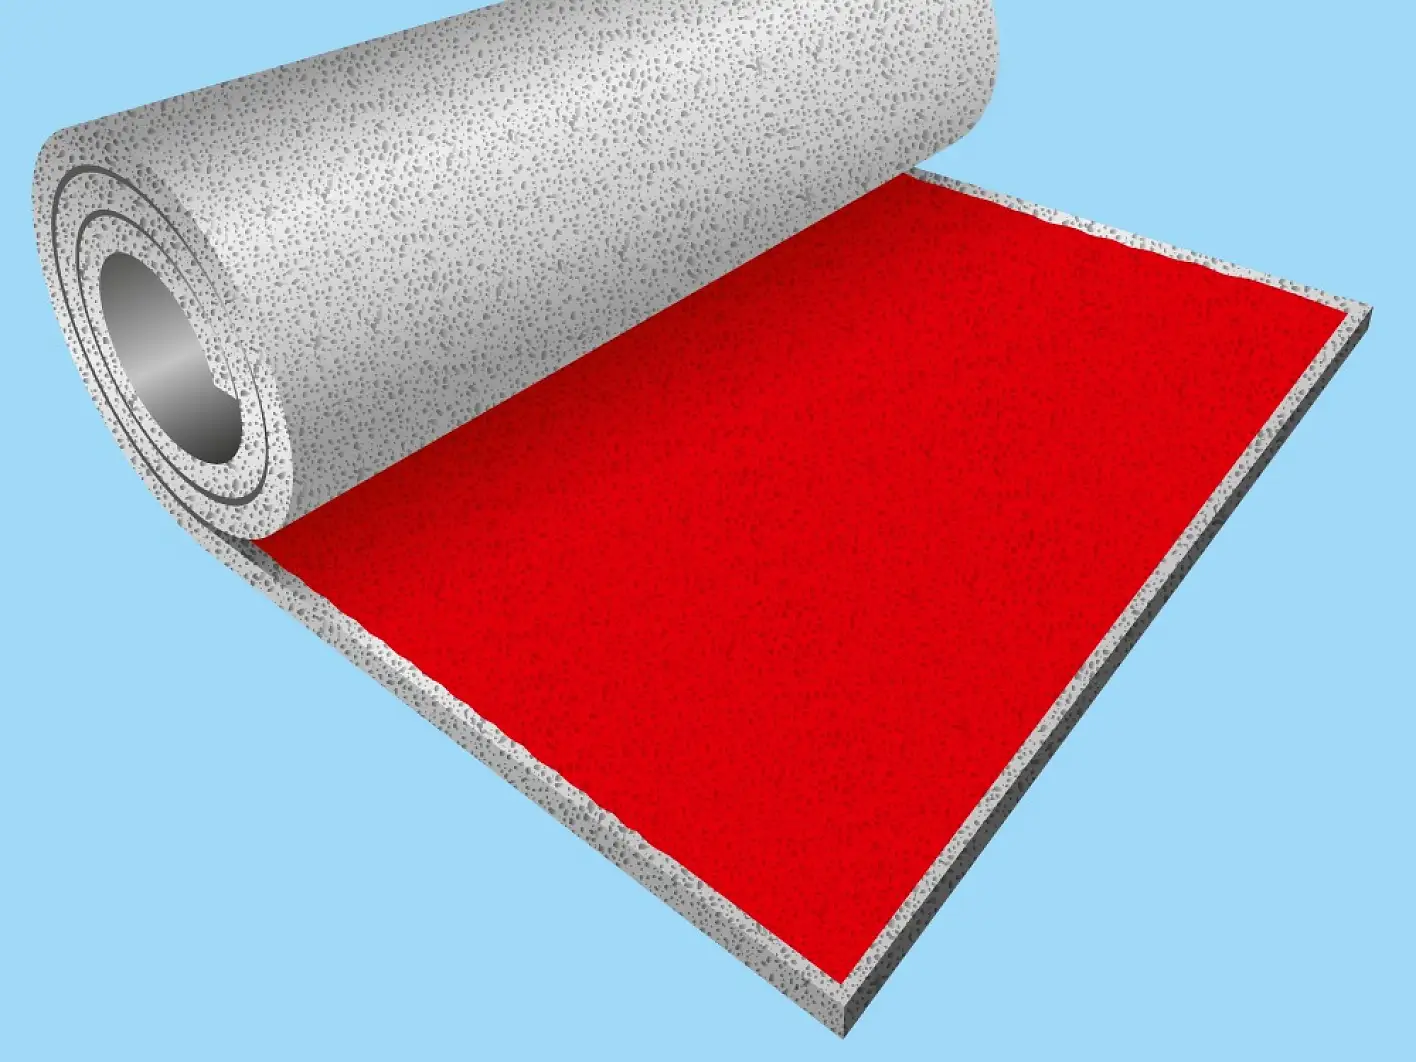 Using transfer and scrim backed tapes for foam lamination.